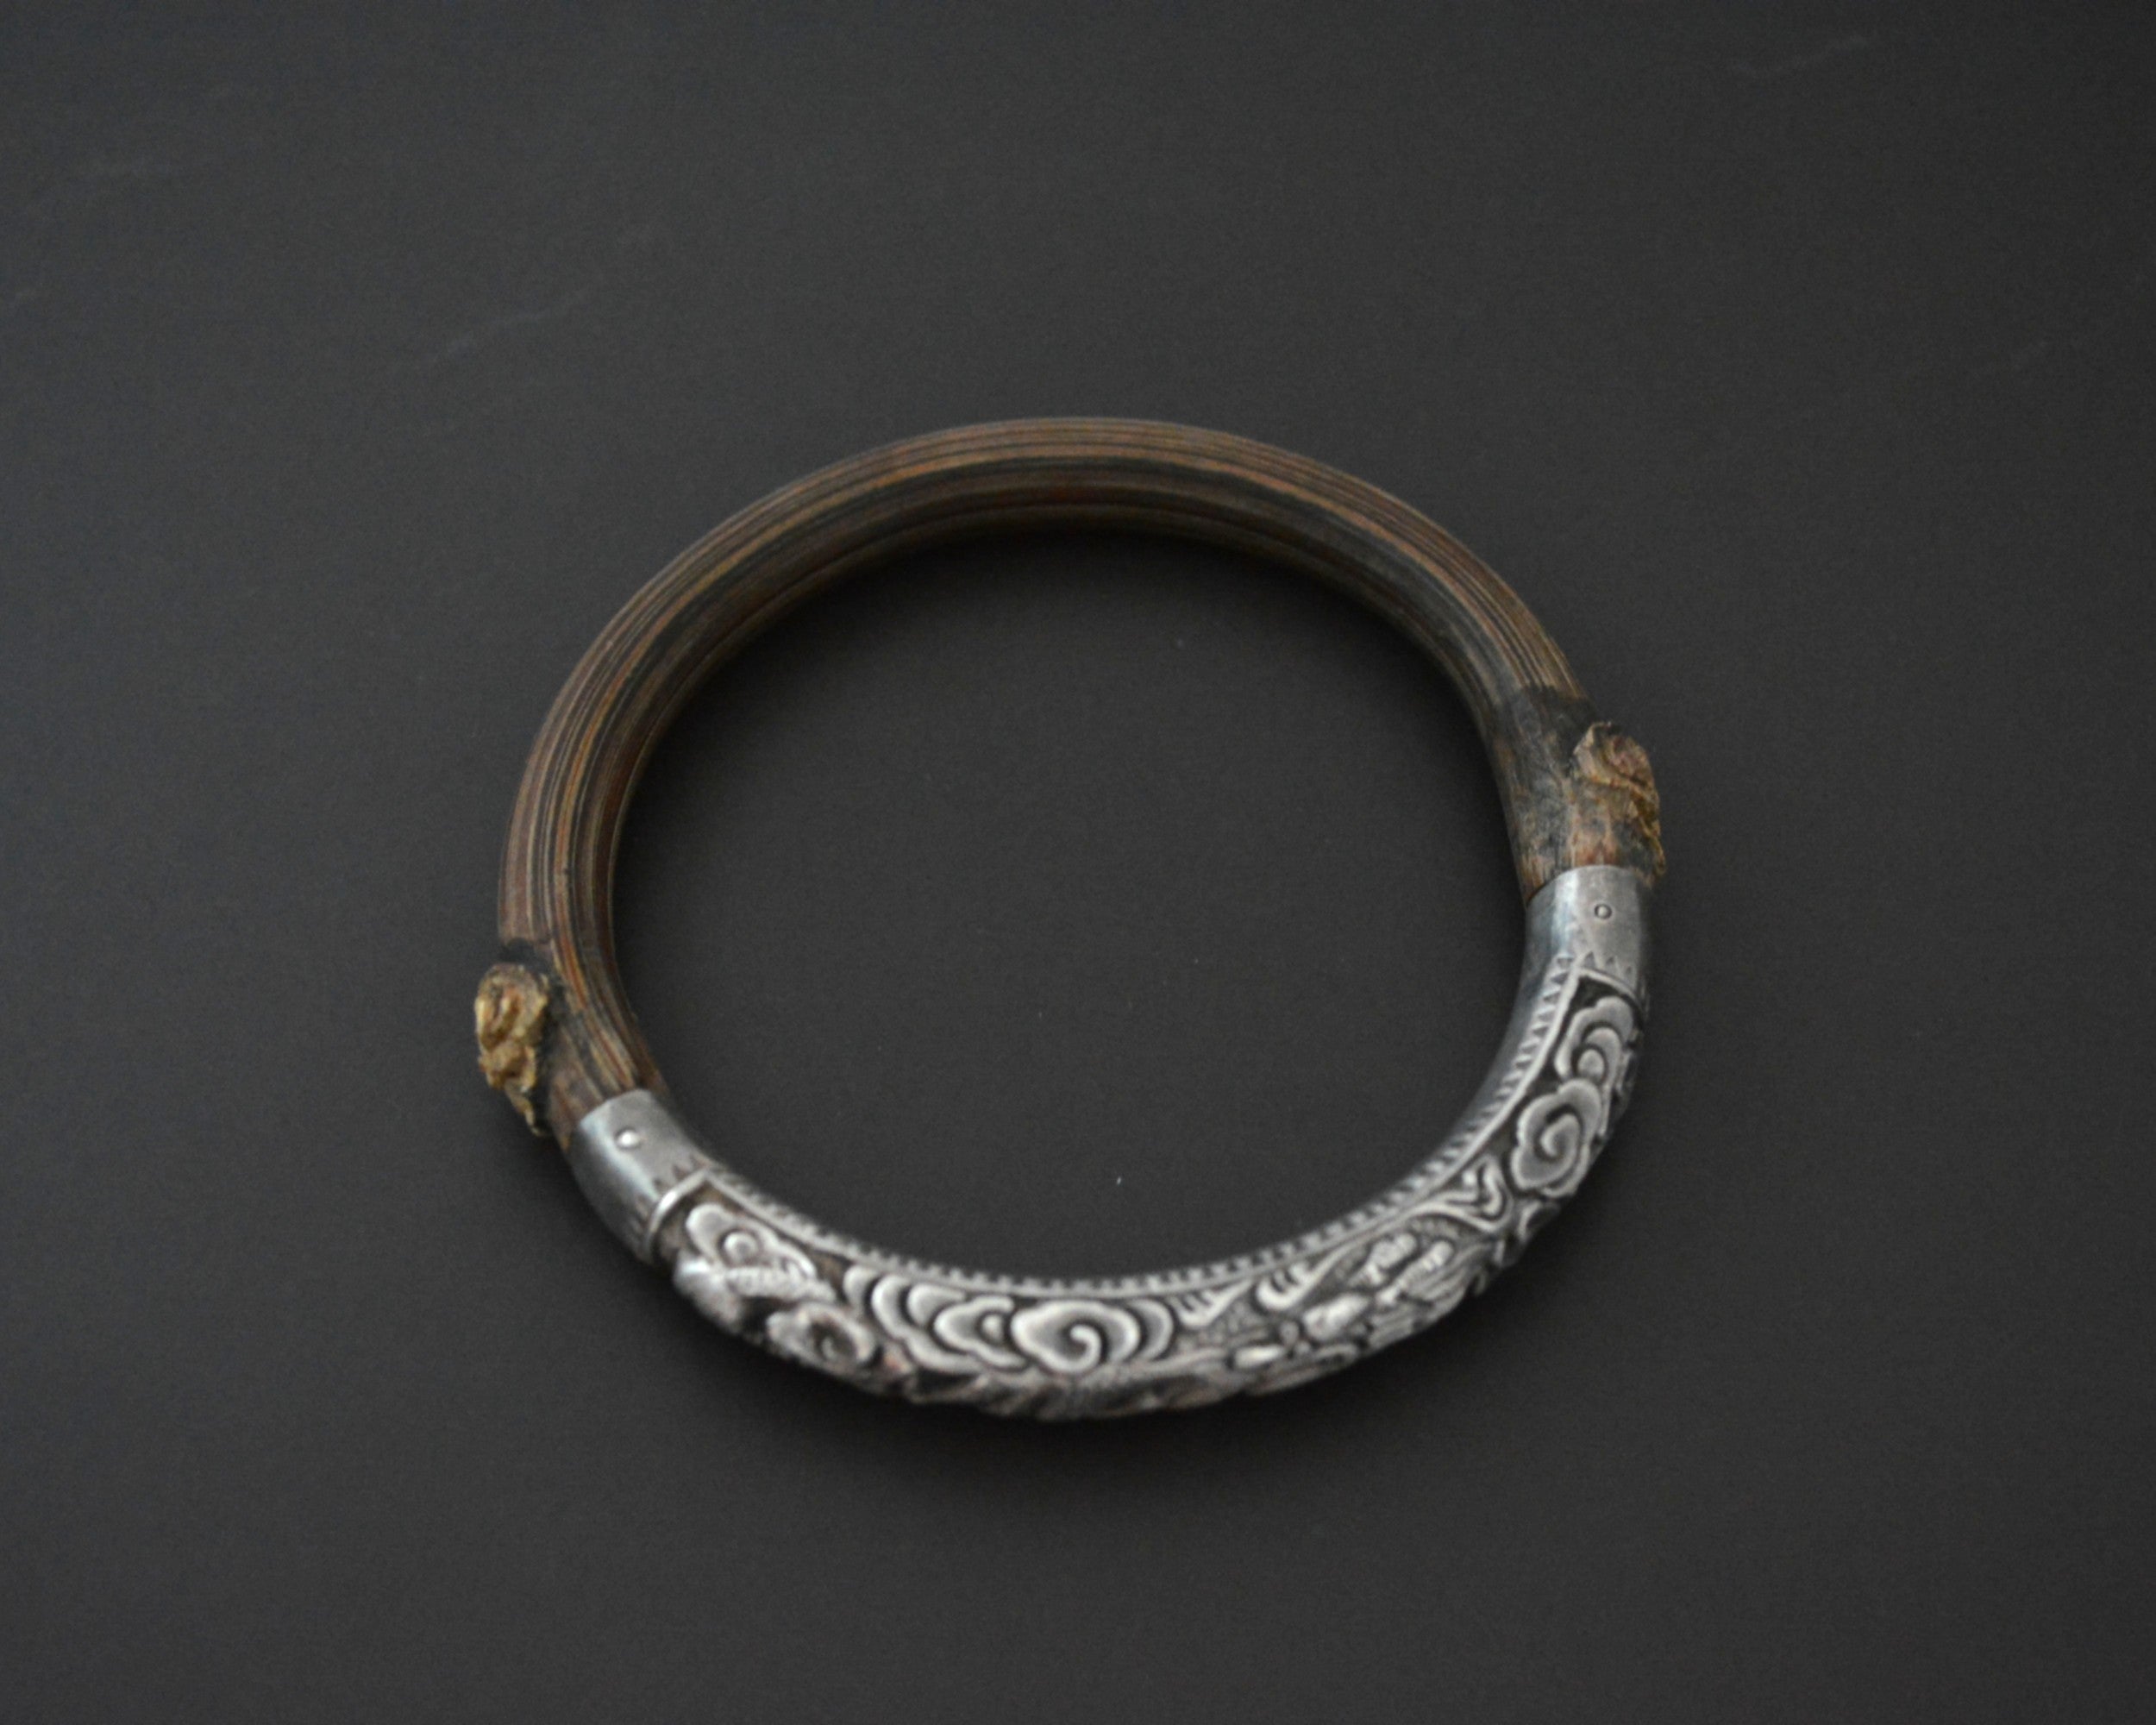 Antique Chinese Bamboo Bracelet with Silver Repoussee Dragon